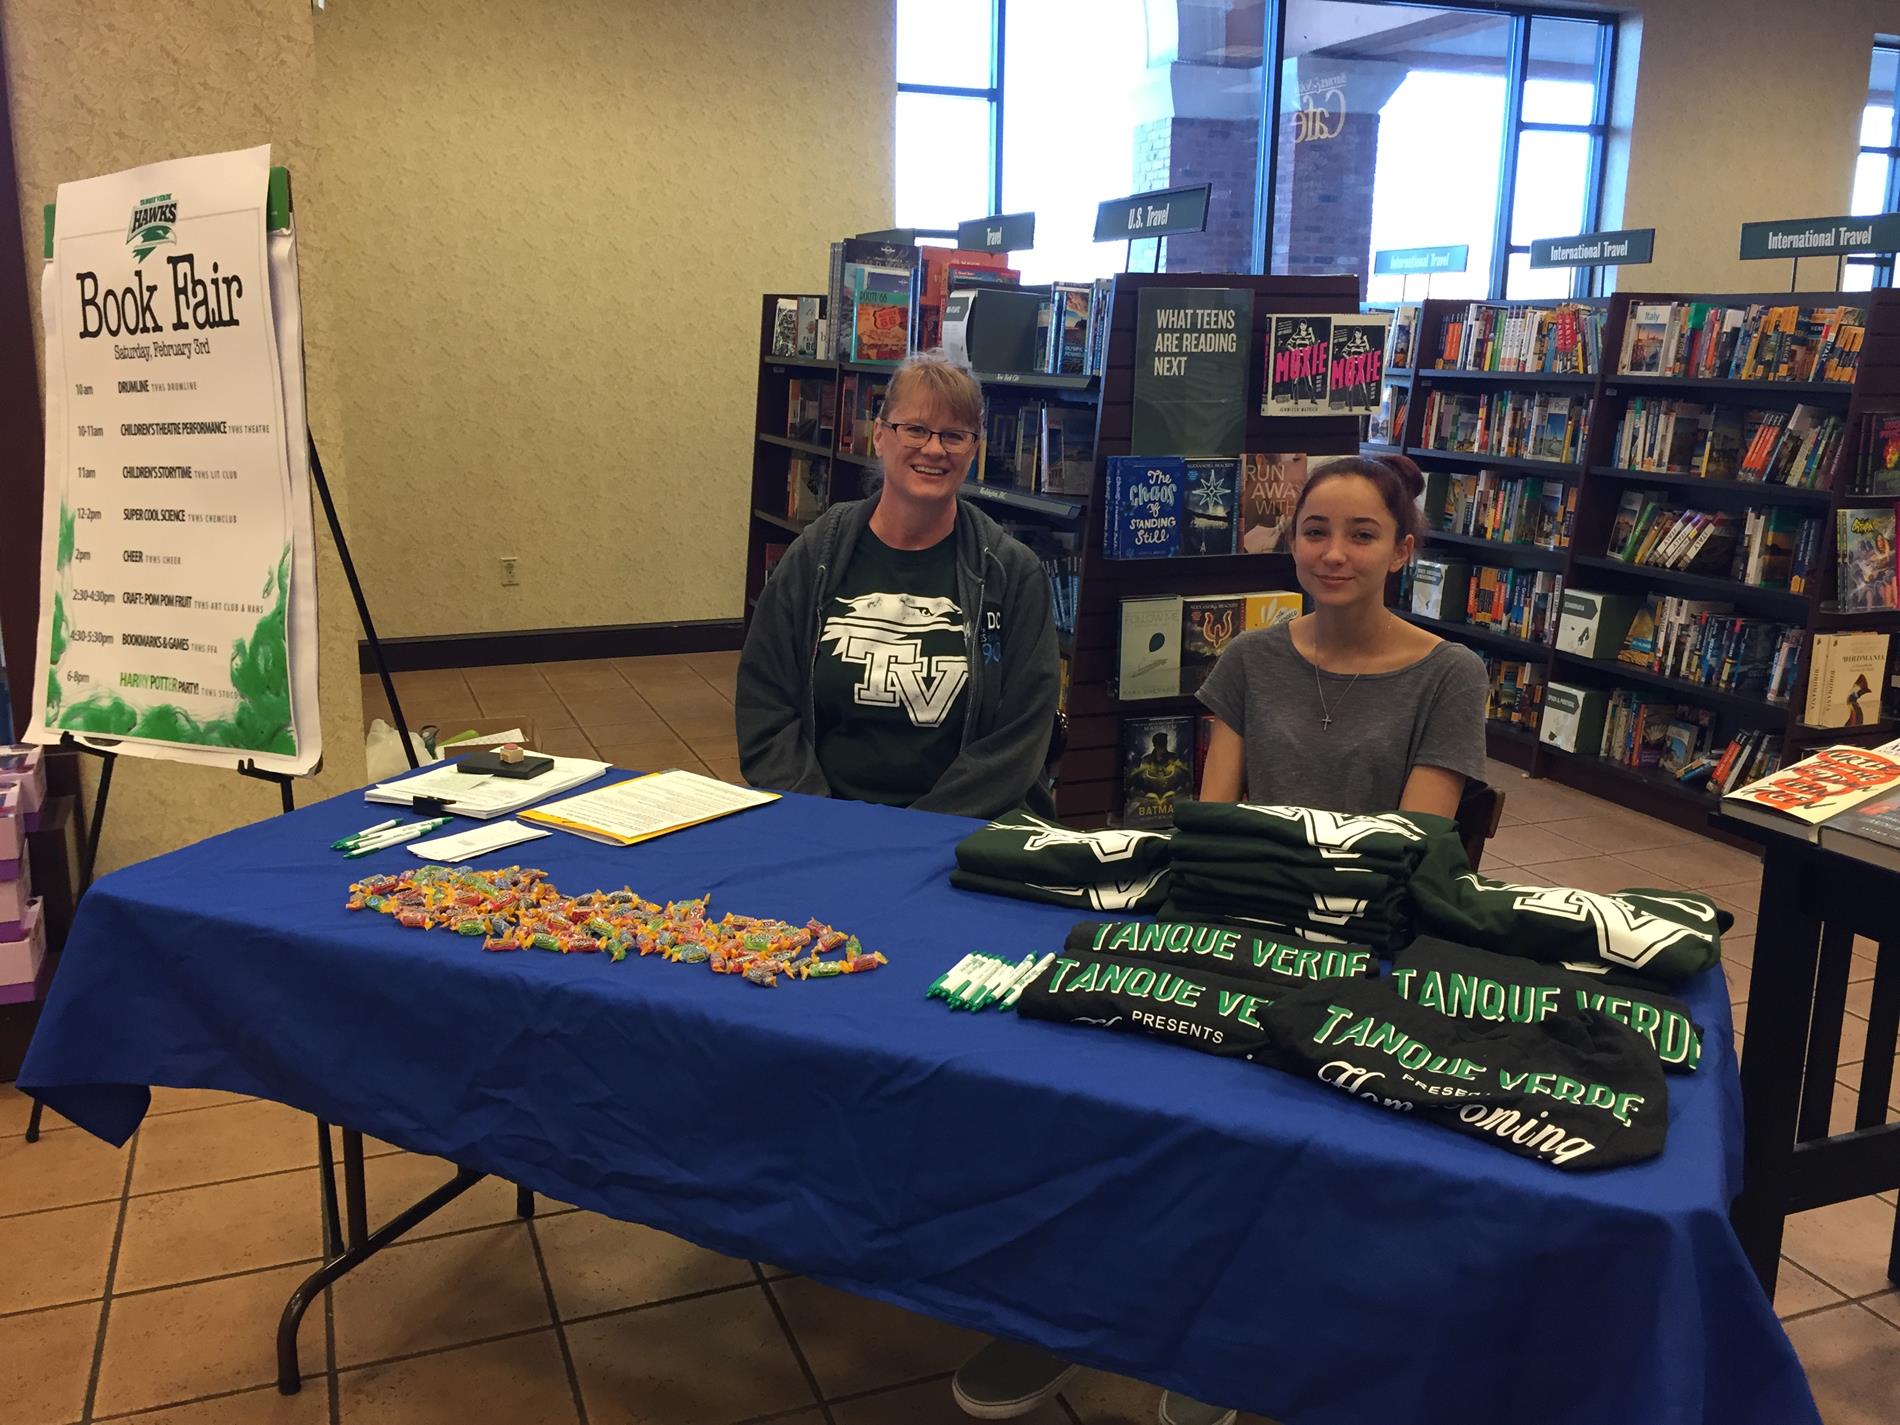 TVHS information table at the Book Fair